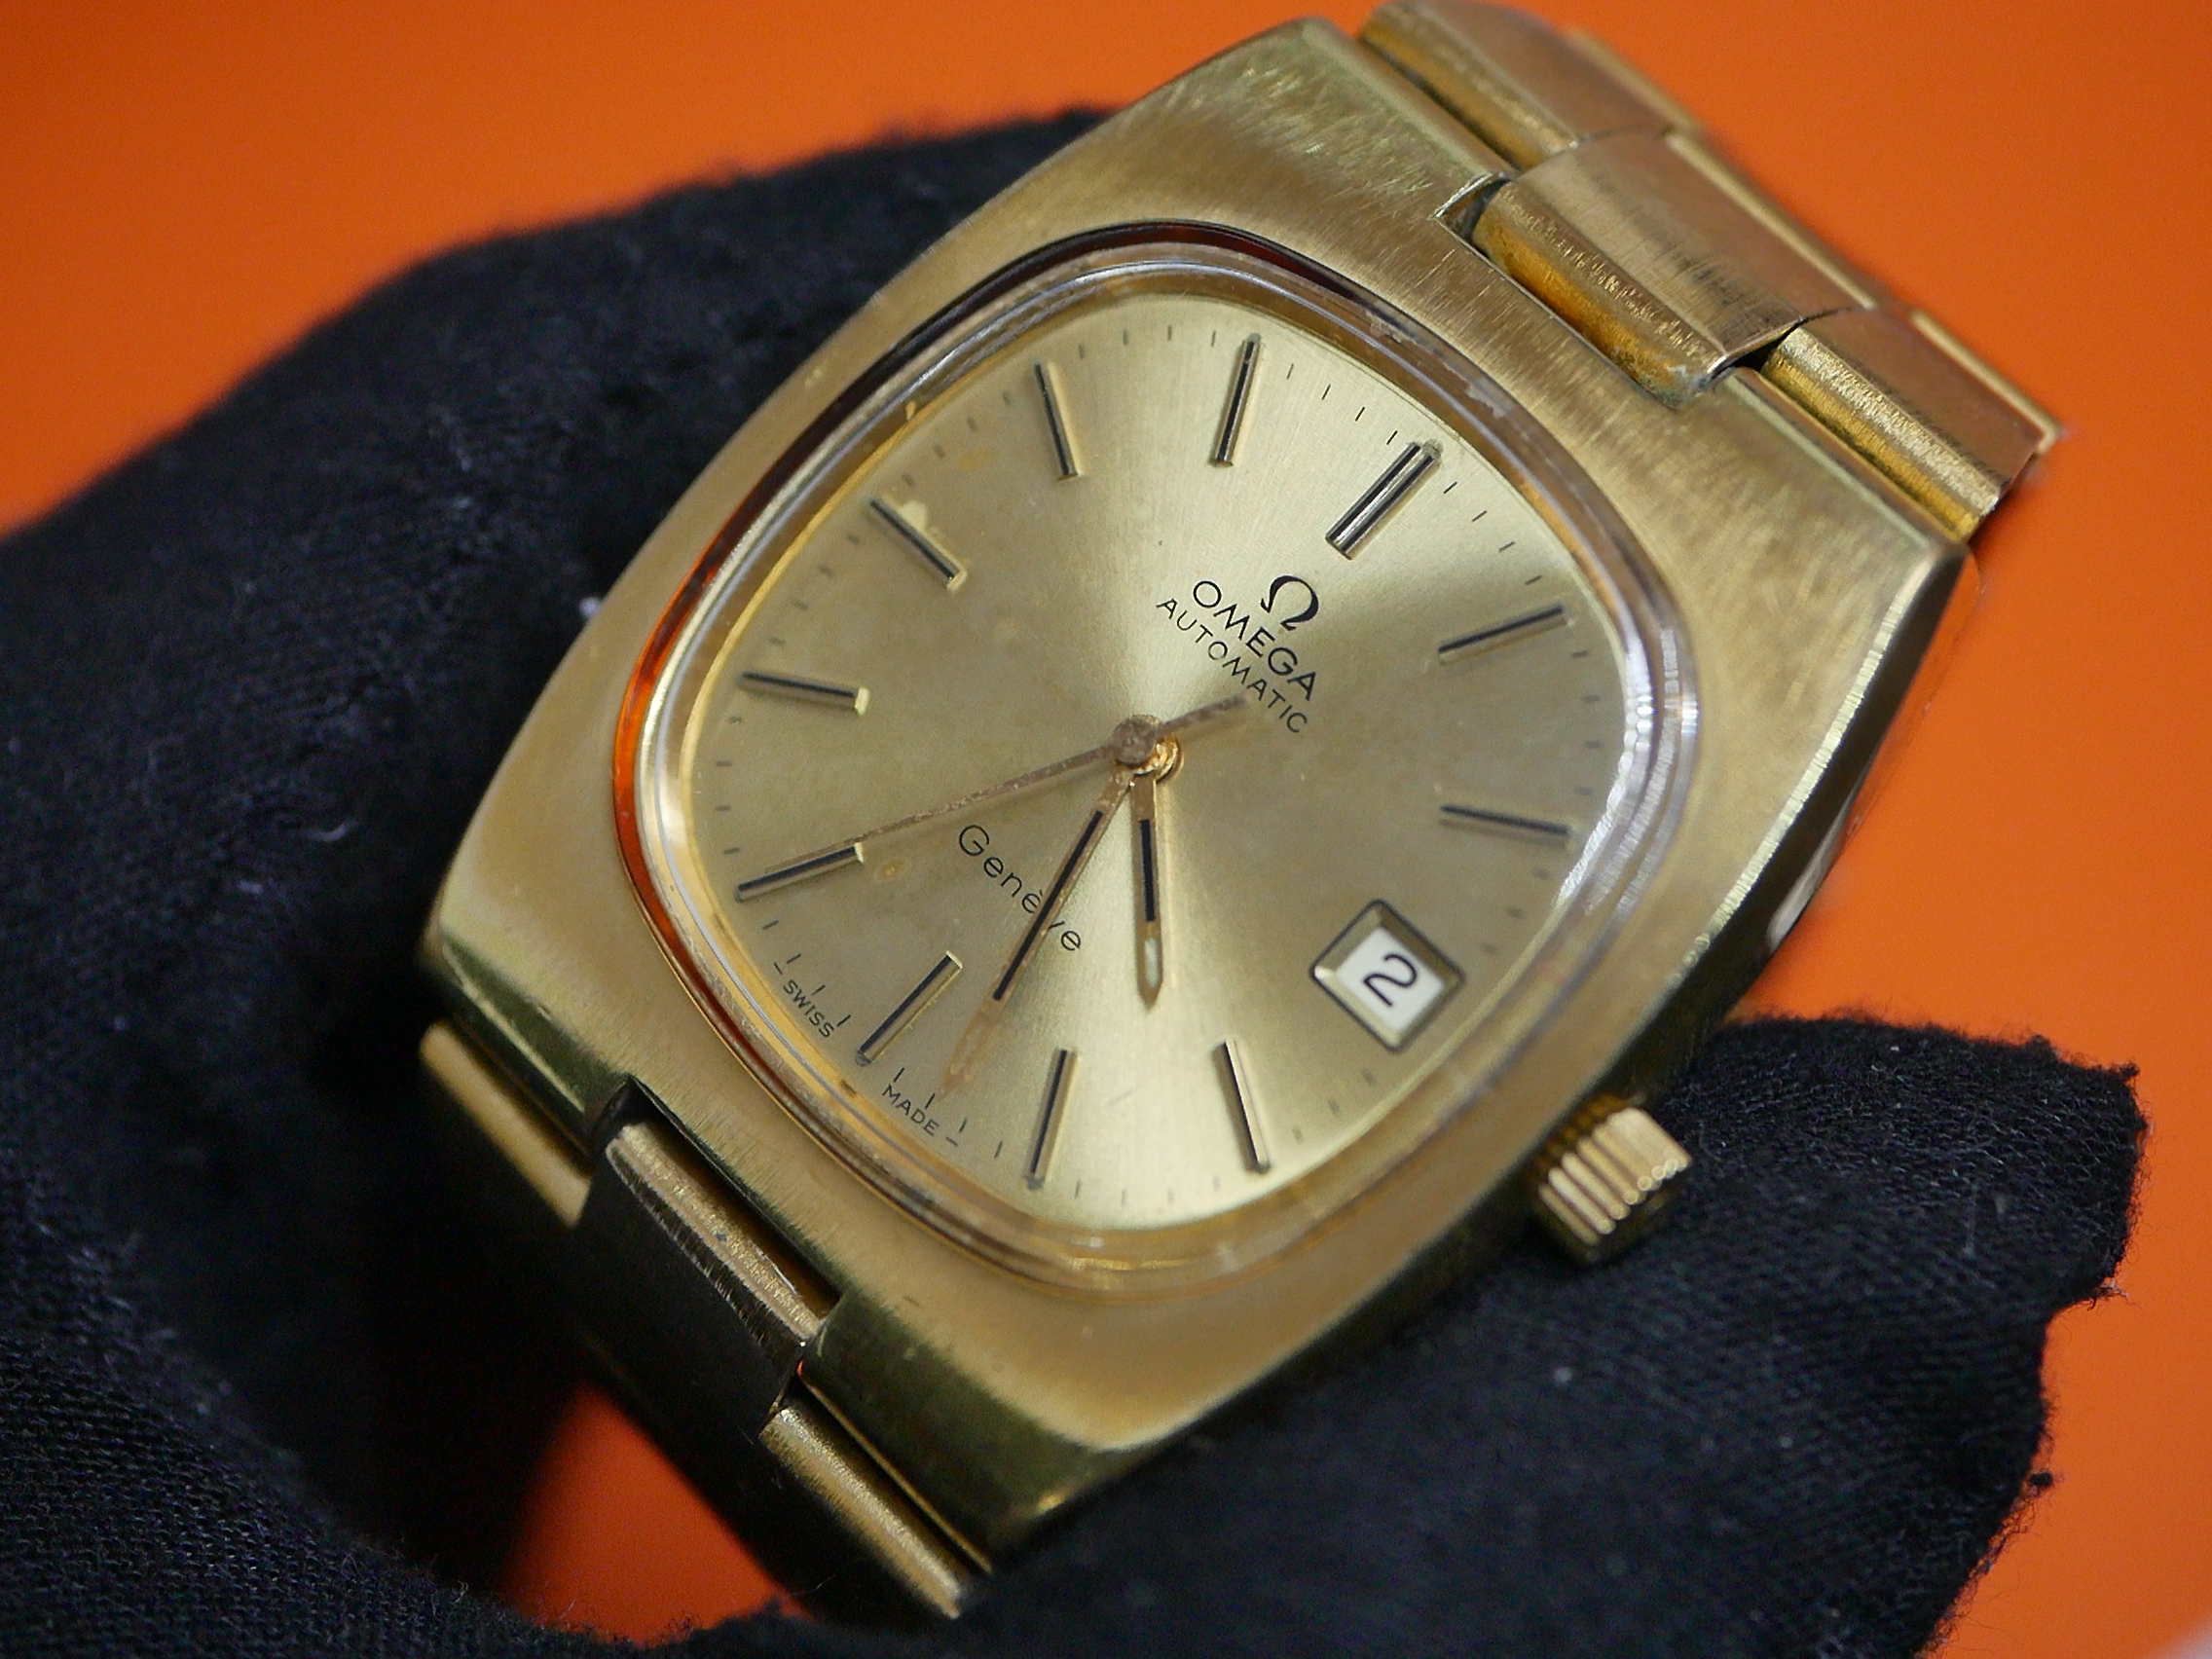 WTS] Omega Automatic Geneve 36mm Gold Plated TV Case 166.0191 from